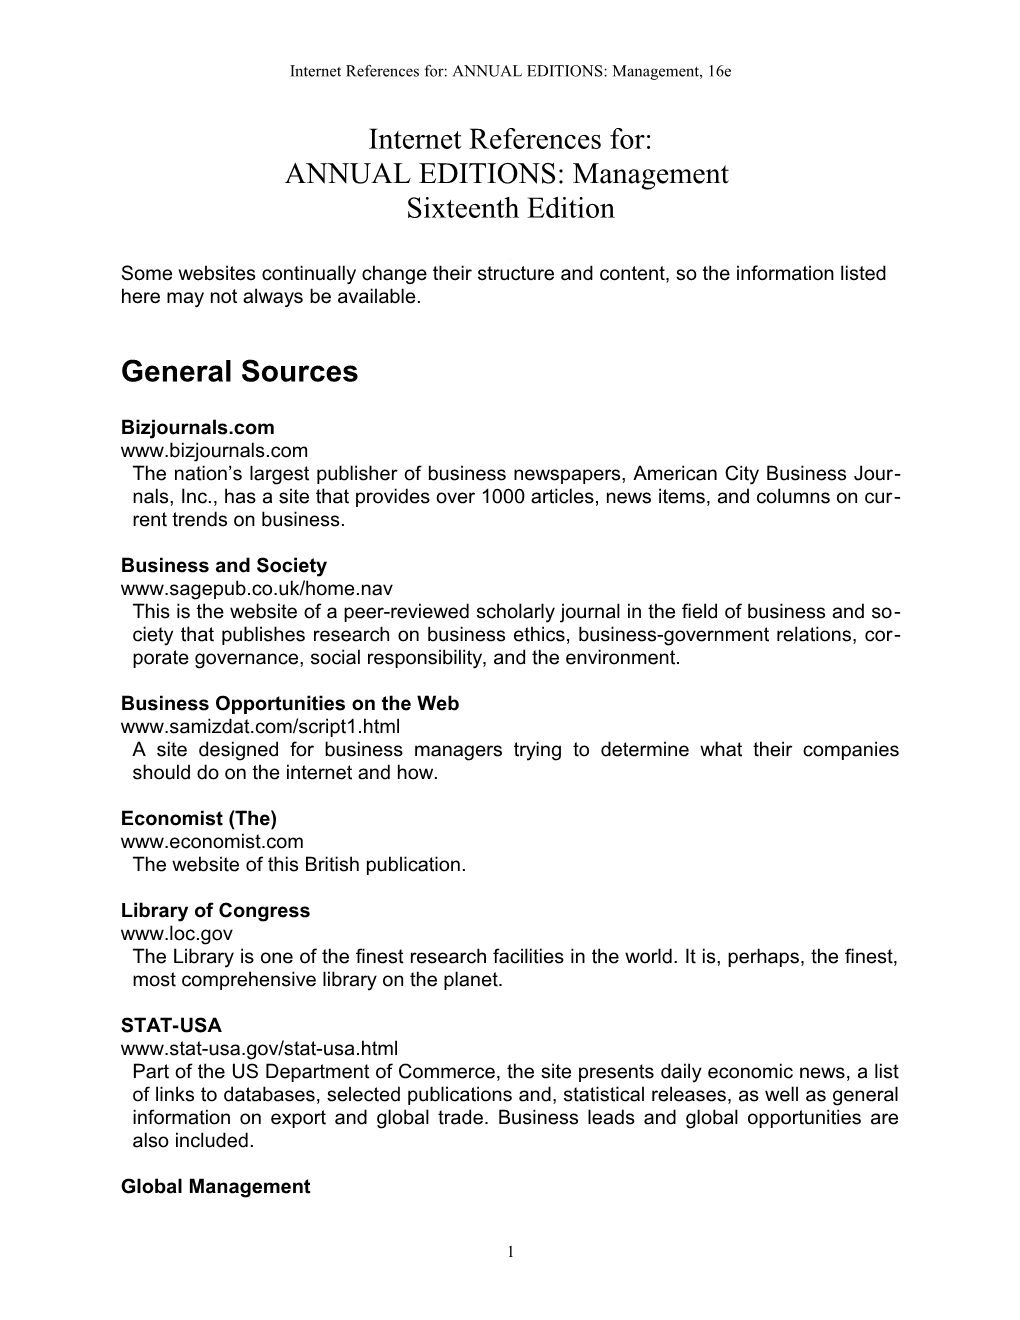 Internet References For: ANNUAL EDITIONS: Management, 16E